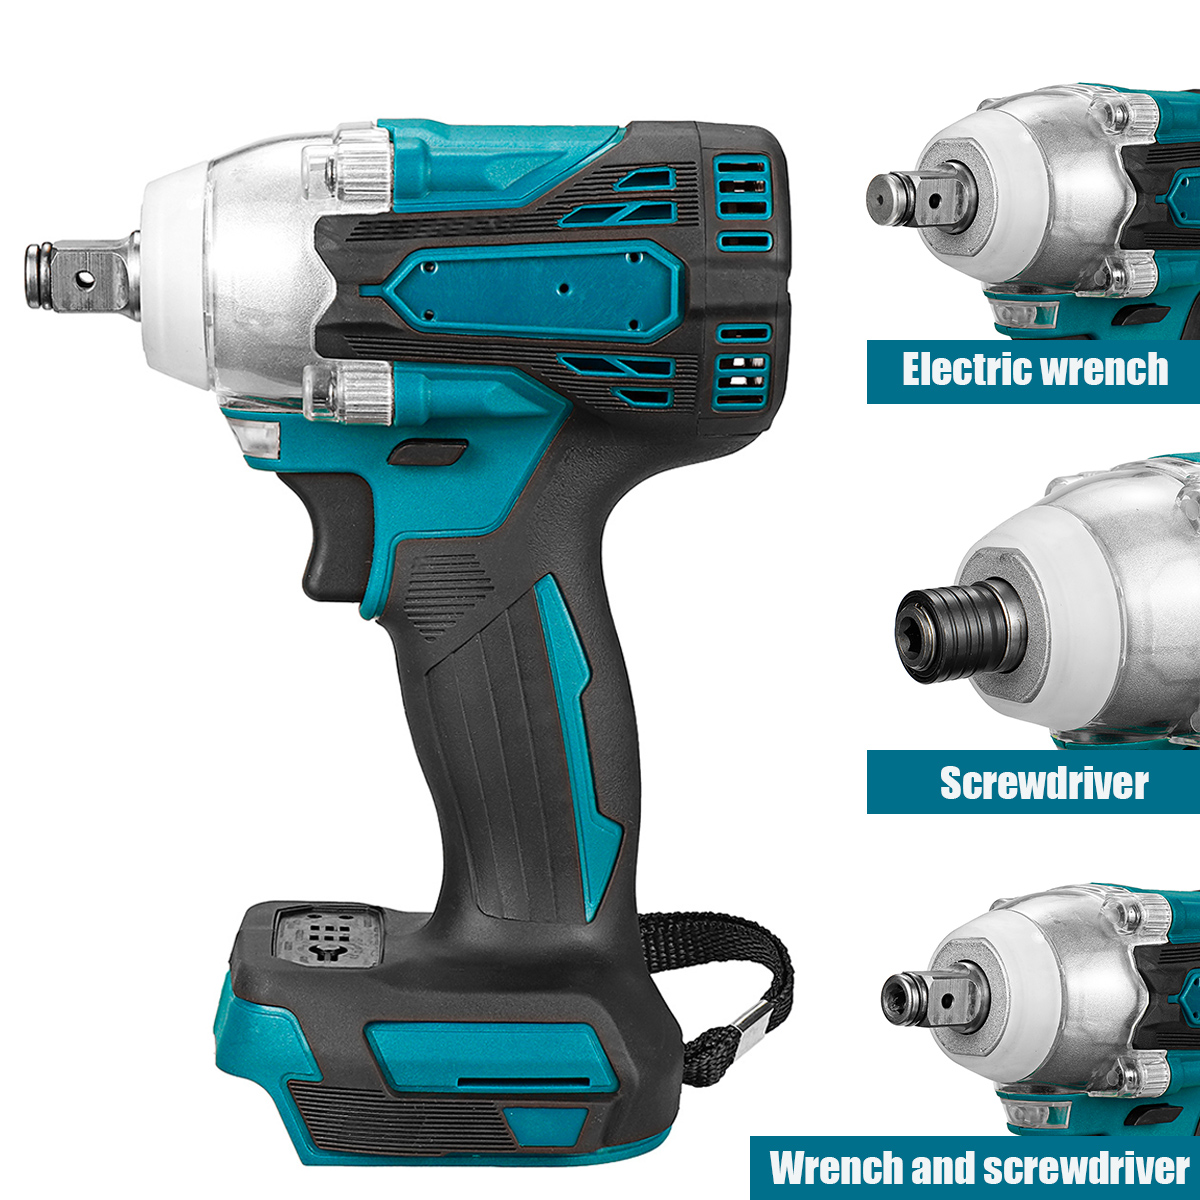 125mm-Cordless-Brushless-Impact-Wrench-Drill-Drive-Screwdriver-Power-Tool-For-Makita-18V-battery-1855969-9